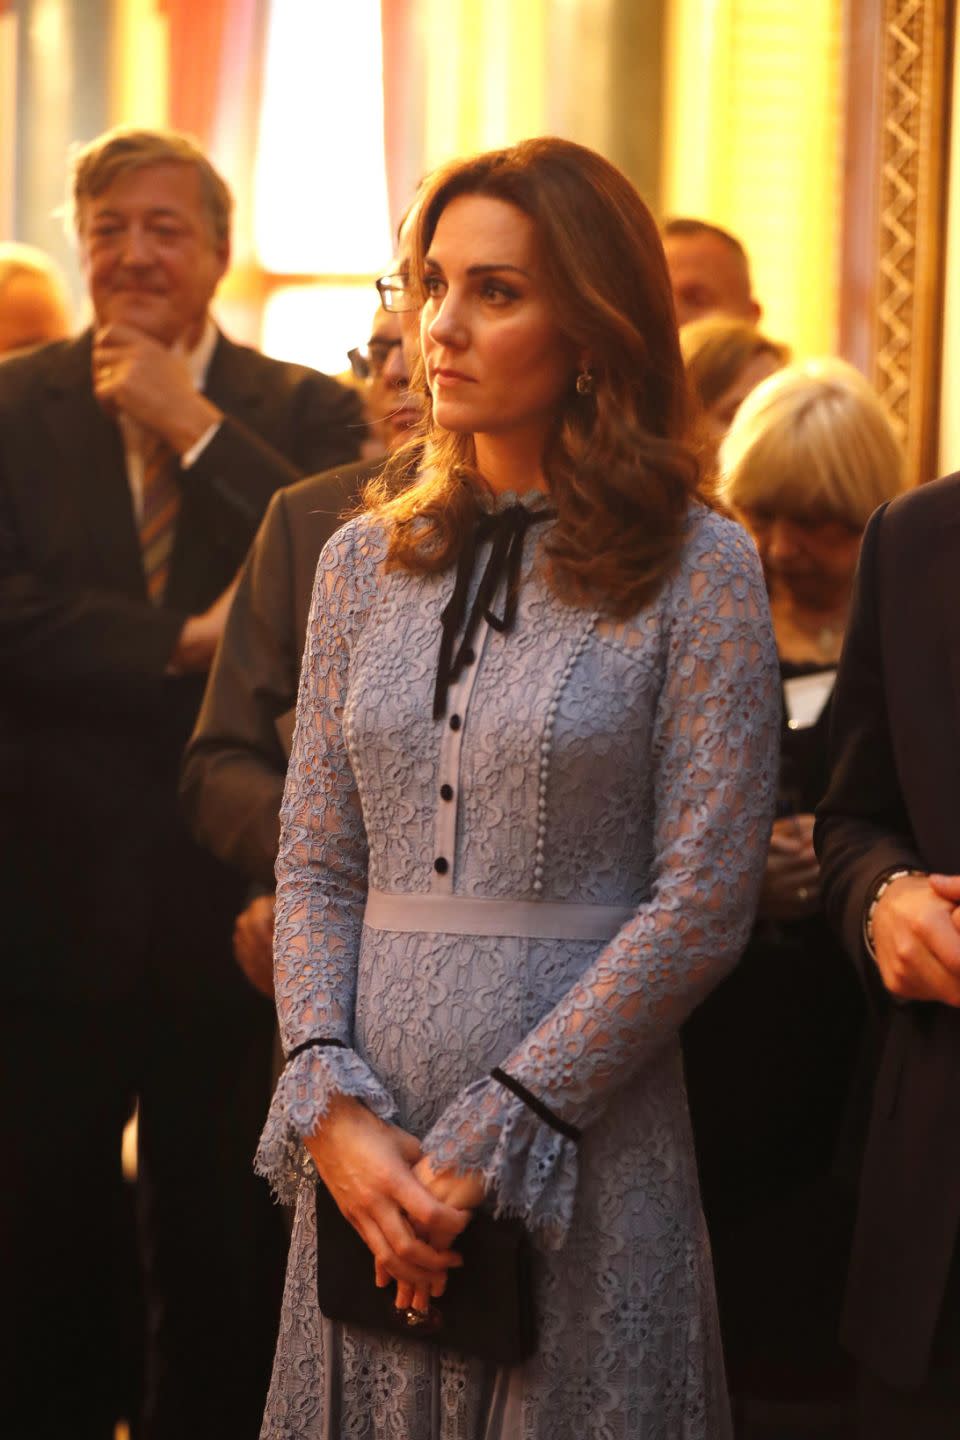 The Duchess wore a stunning Temperley London blue lace dress for the outing. Photo: Getty Images